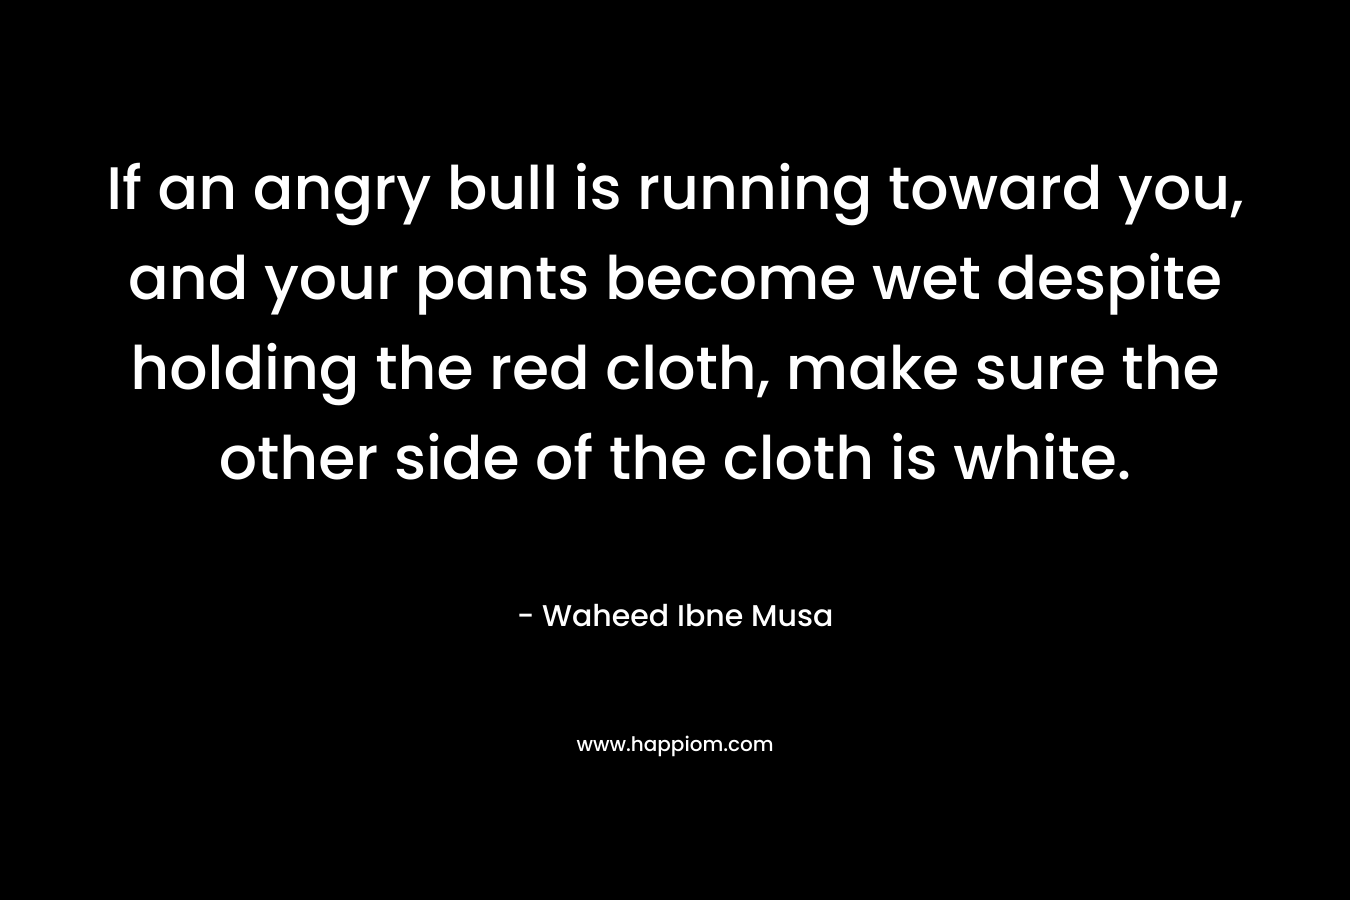 If an angry bull is running toward you, and your pants become wet despite holding the red cloth, make sure the other side of the cloth is white. – Waheed Ibne Musa